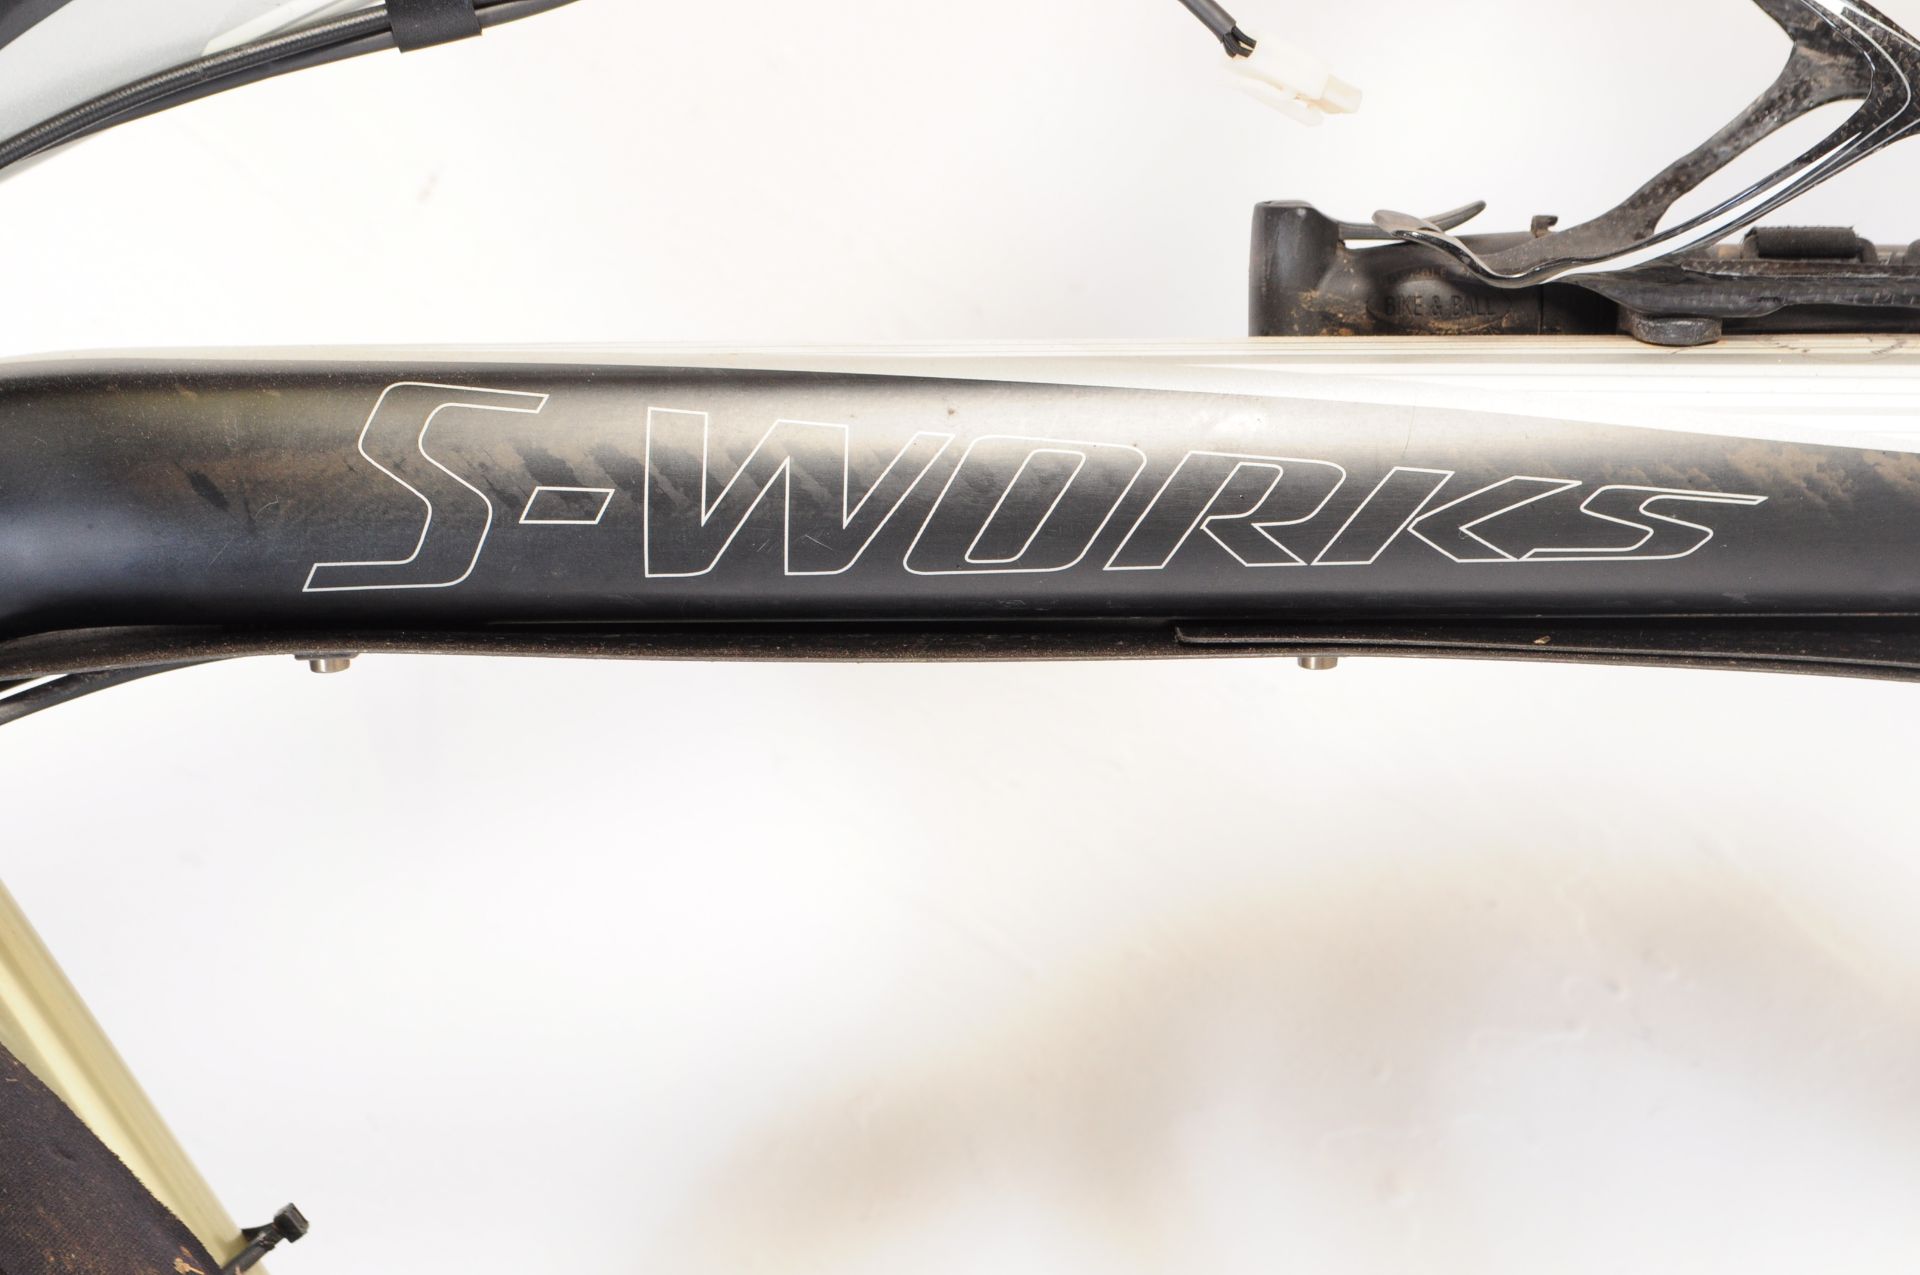 CONTEMPORARY CARBON FIBRE MOUNTAIN BIKE BY S-WORKS - Image 8 of 9